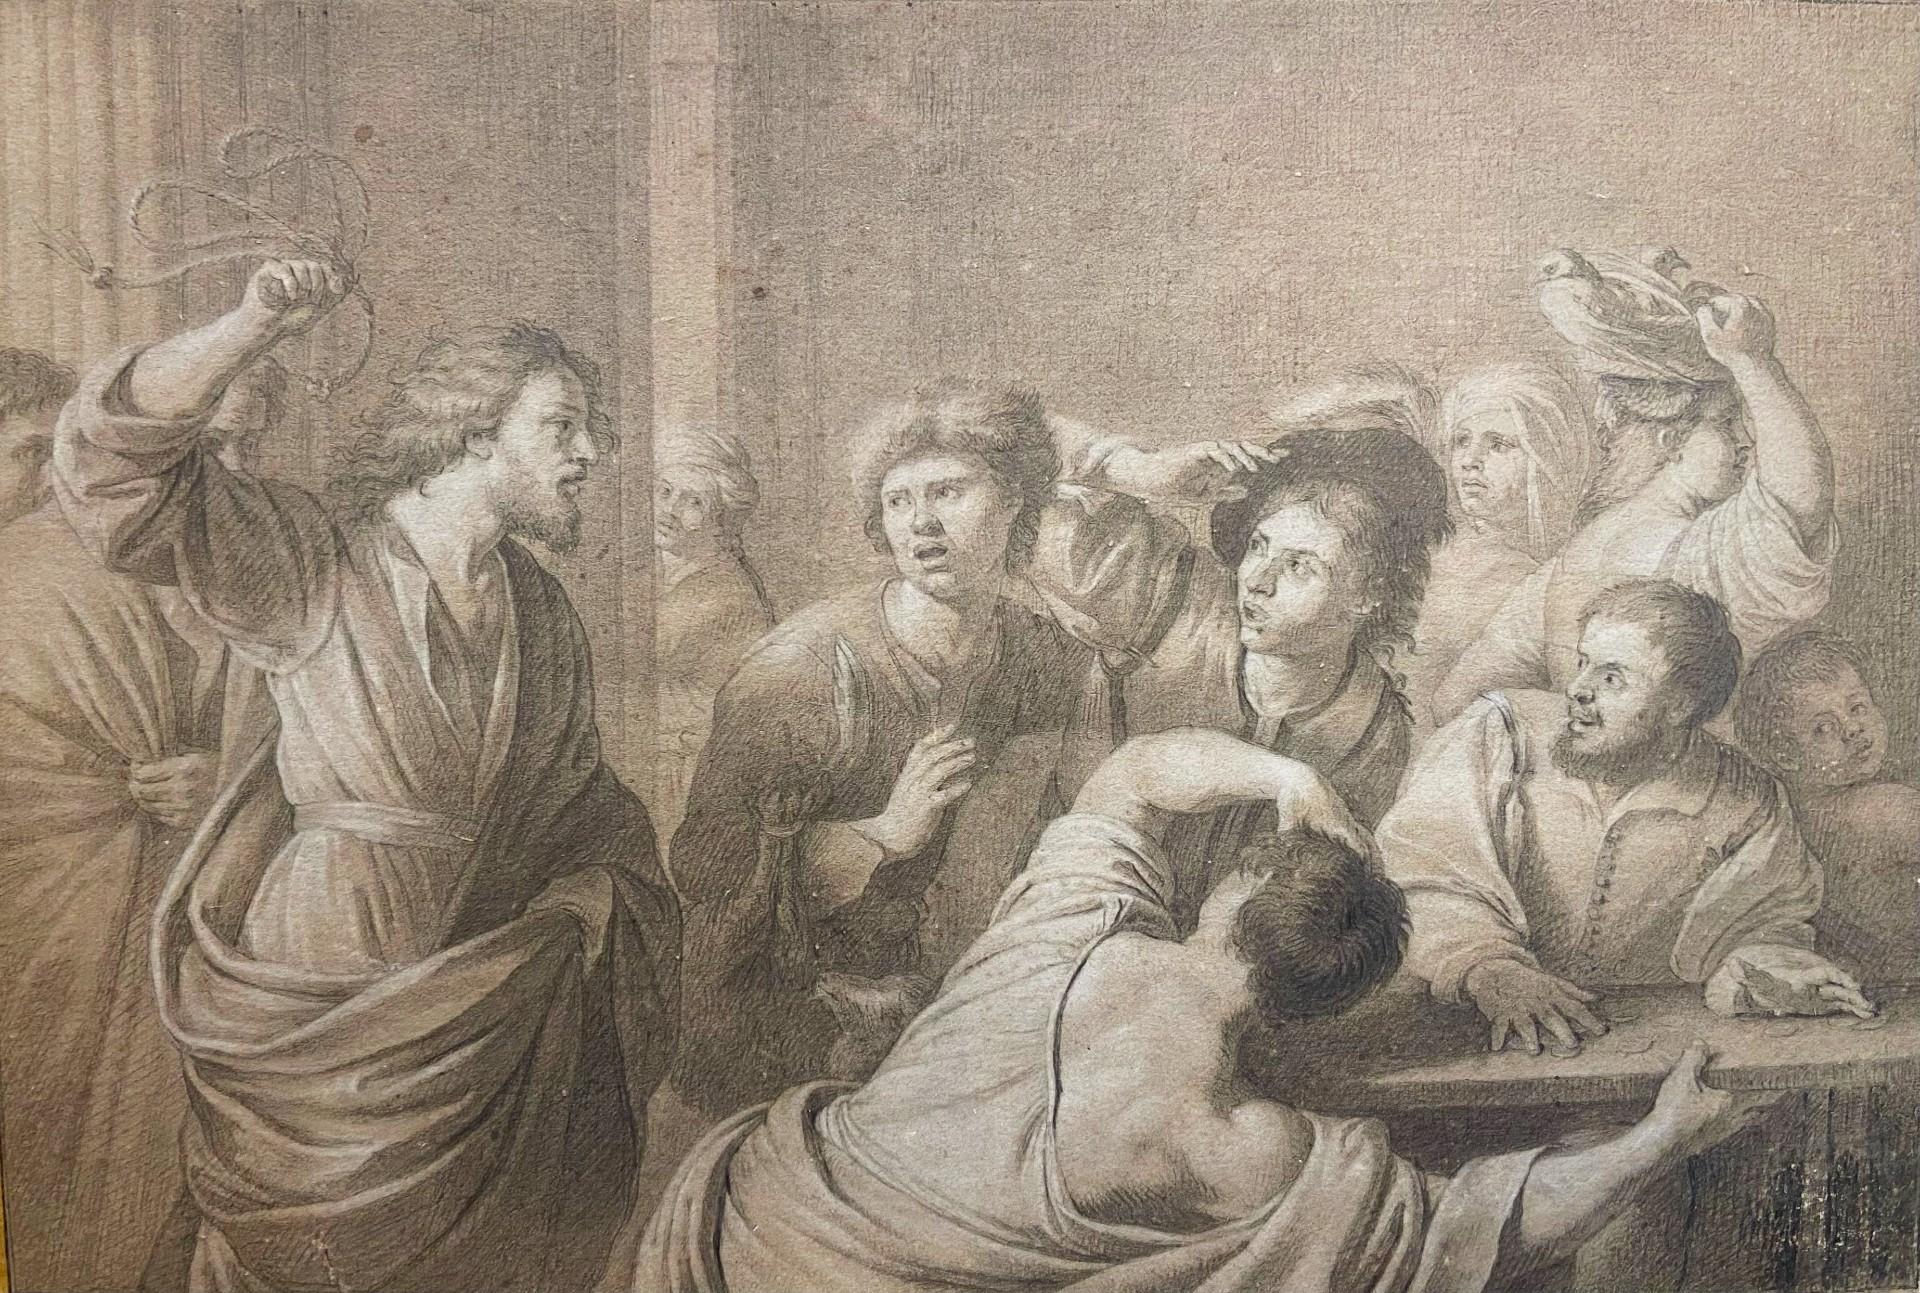 Pencil and chalk on paper
Image size: 8 1/2 x 13 inches (22 x 33cm)


This wonderful drawing depicts 'The Cleansing of the Temple', a biblical narrative where Christ expels merchants and the money changers from the Temple in Jerusalem. This is